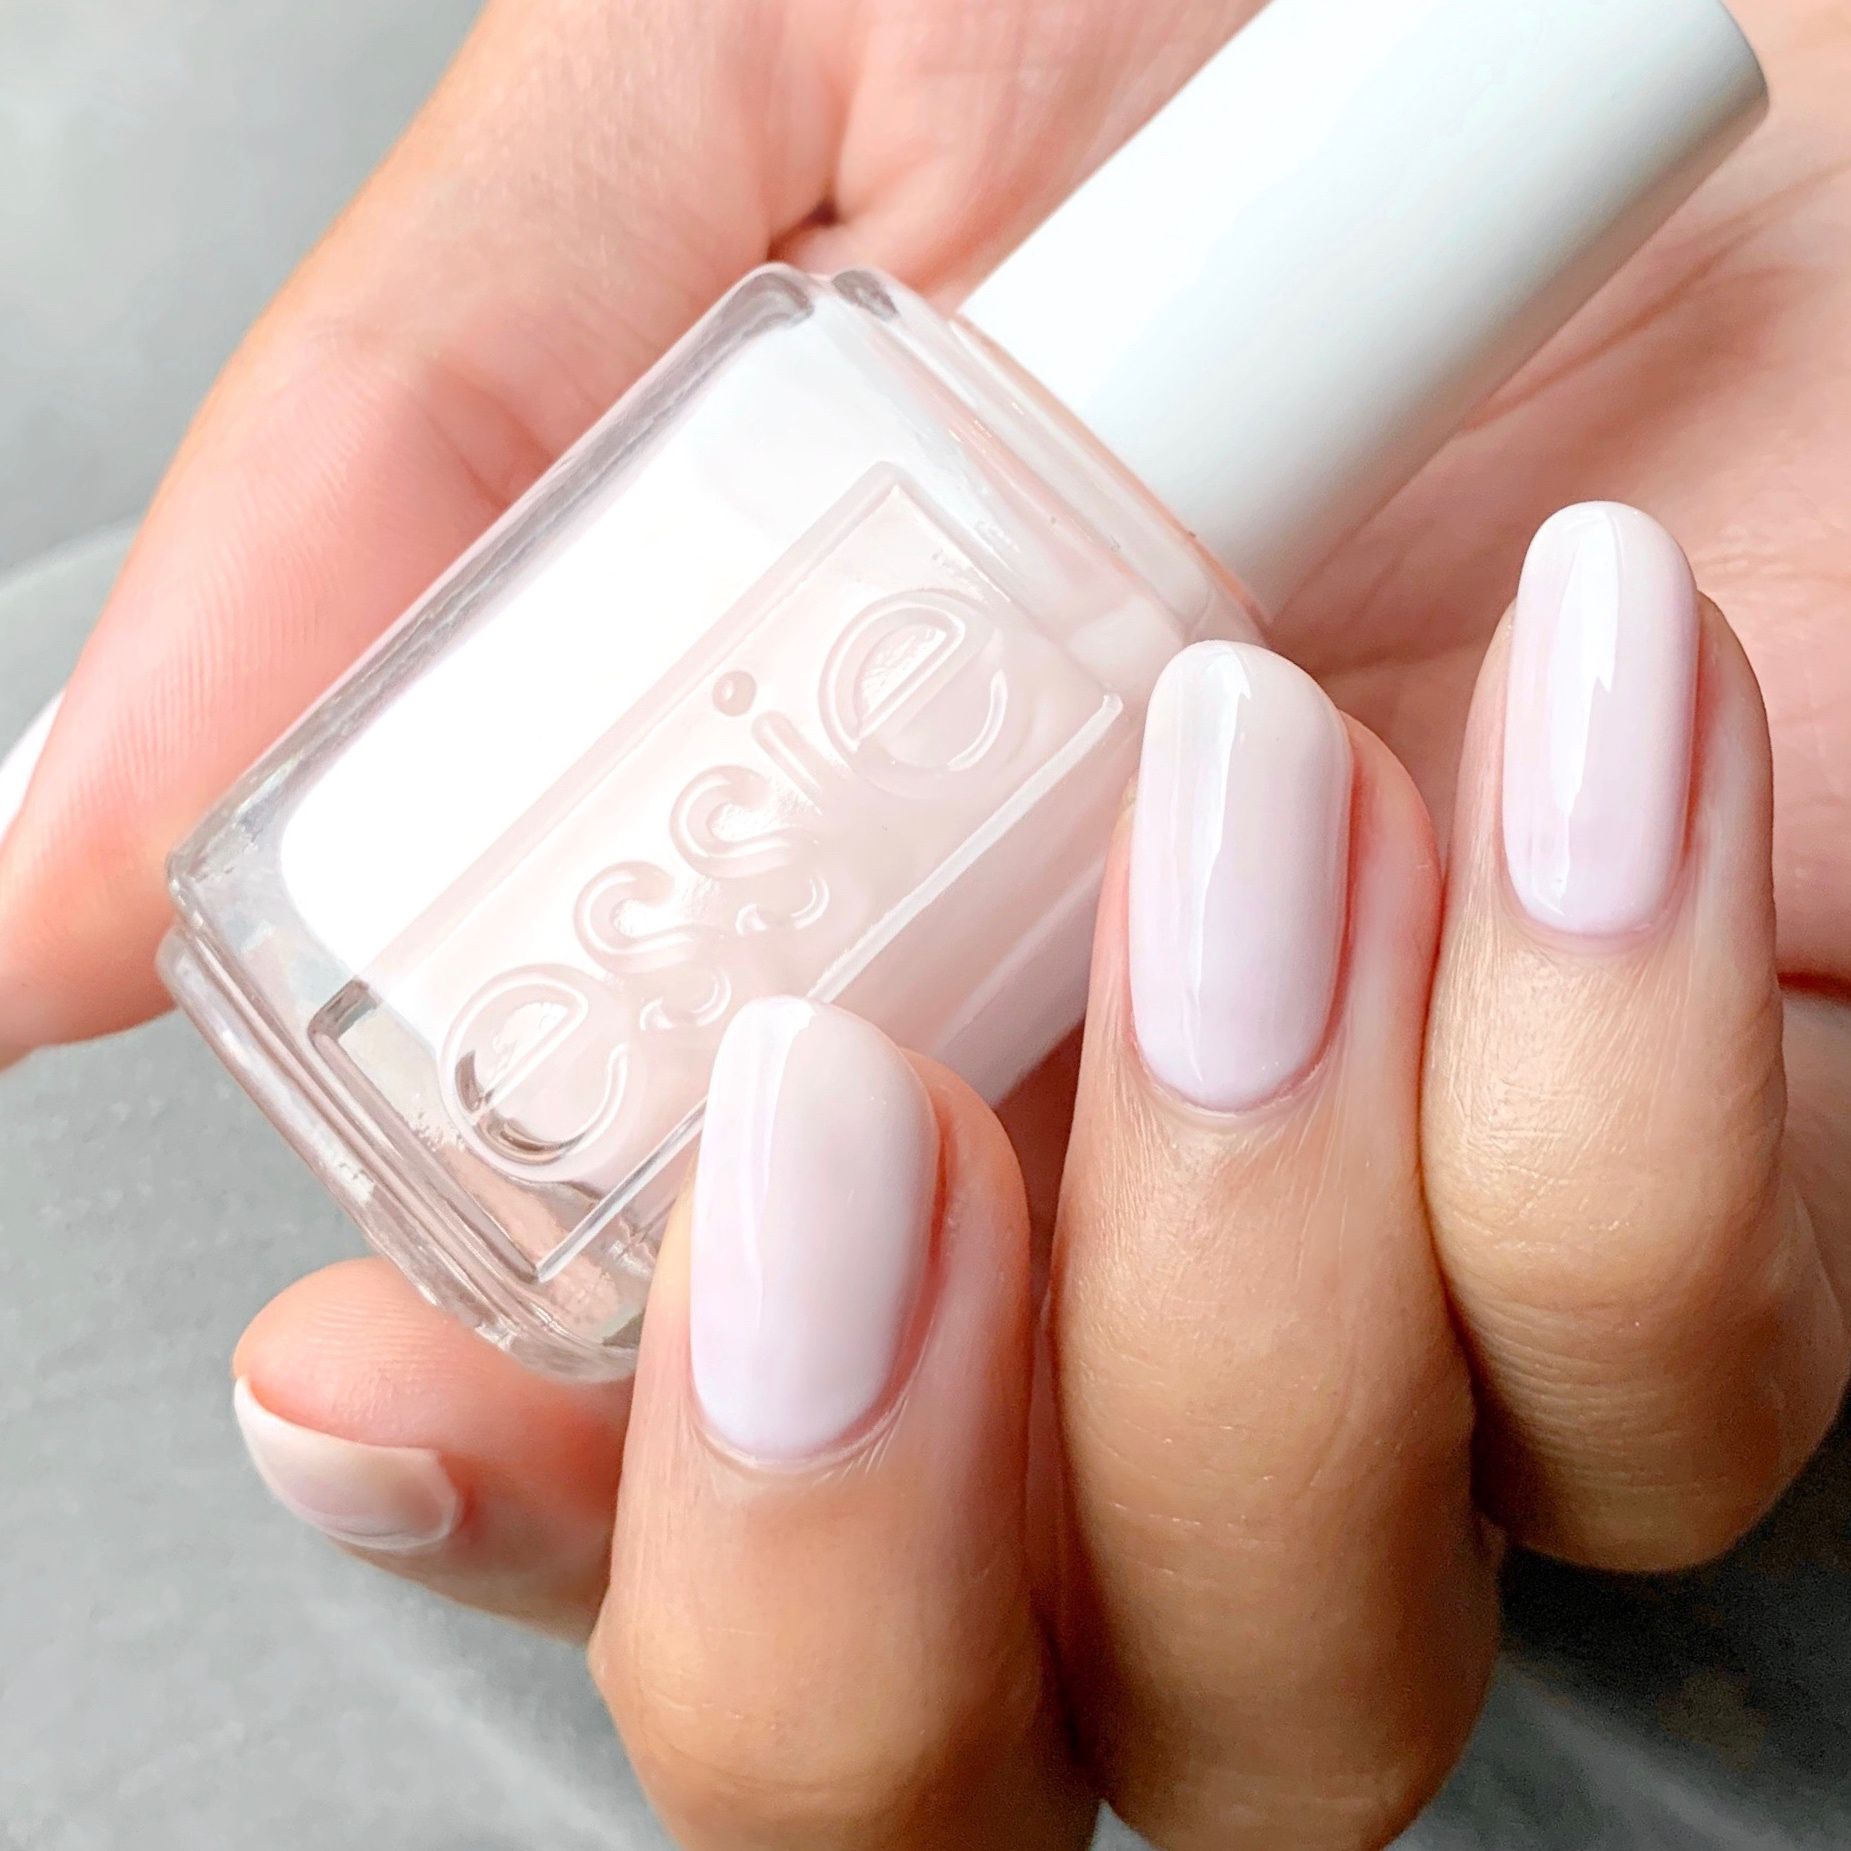 Essie Ballet Slippers A Classic Sheer Pale Pink Nail Polish Ballet Slippers Nail Polish Nail Colors For Pale Skin Pale Pink Nails